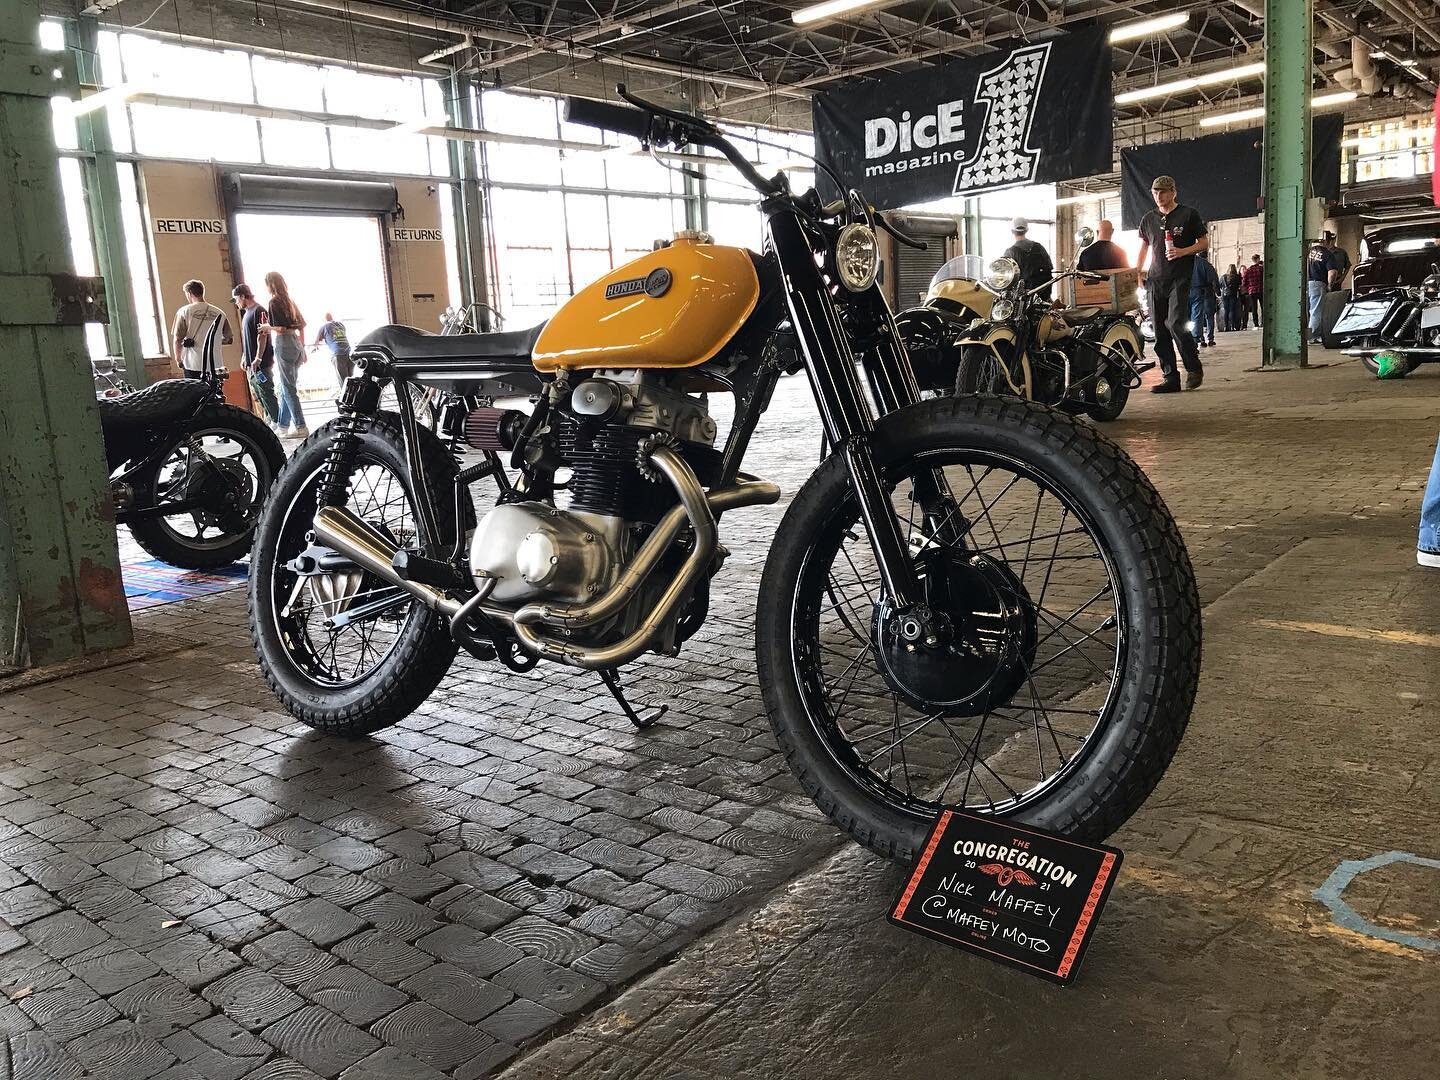 Had a great weekend in Charlotte at @thecongregationshow 2021. Always a great show put on by great people. Big Thanks to @prismsupply_ and @dicemagazine #maffeymoto #design #make #ride #honda #hondacl350 #hondamotorcycles #motorcycle #custommotorcycl